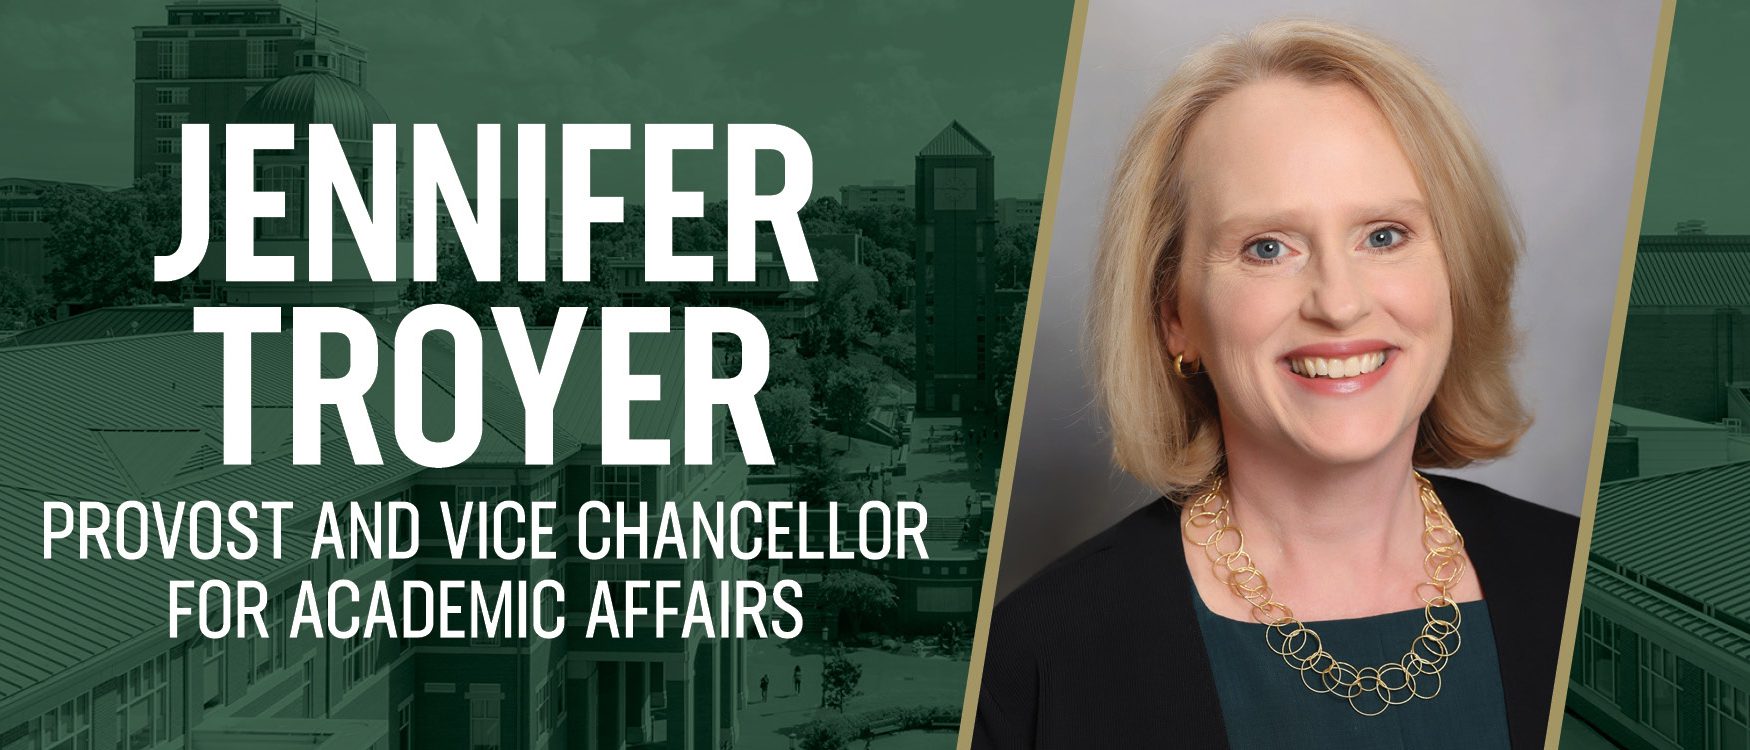 Jennifer Troyer Provost and Vice Chancellor for Academic Affairs.